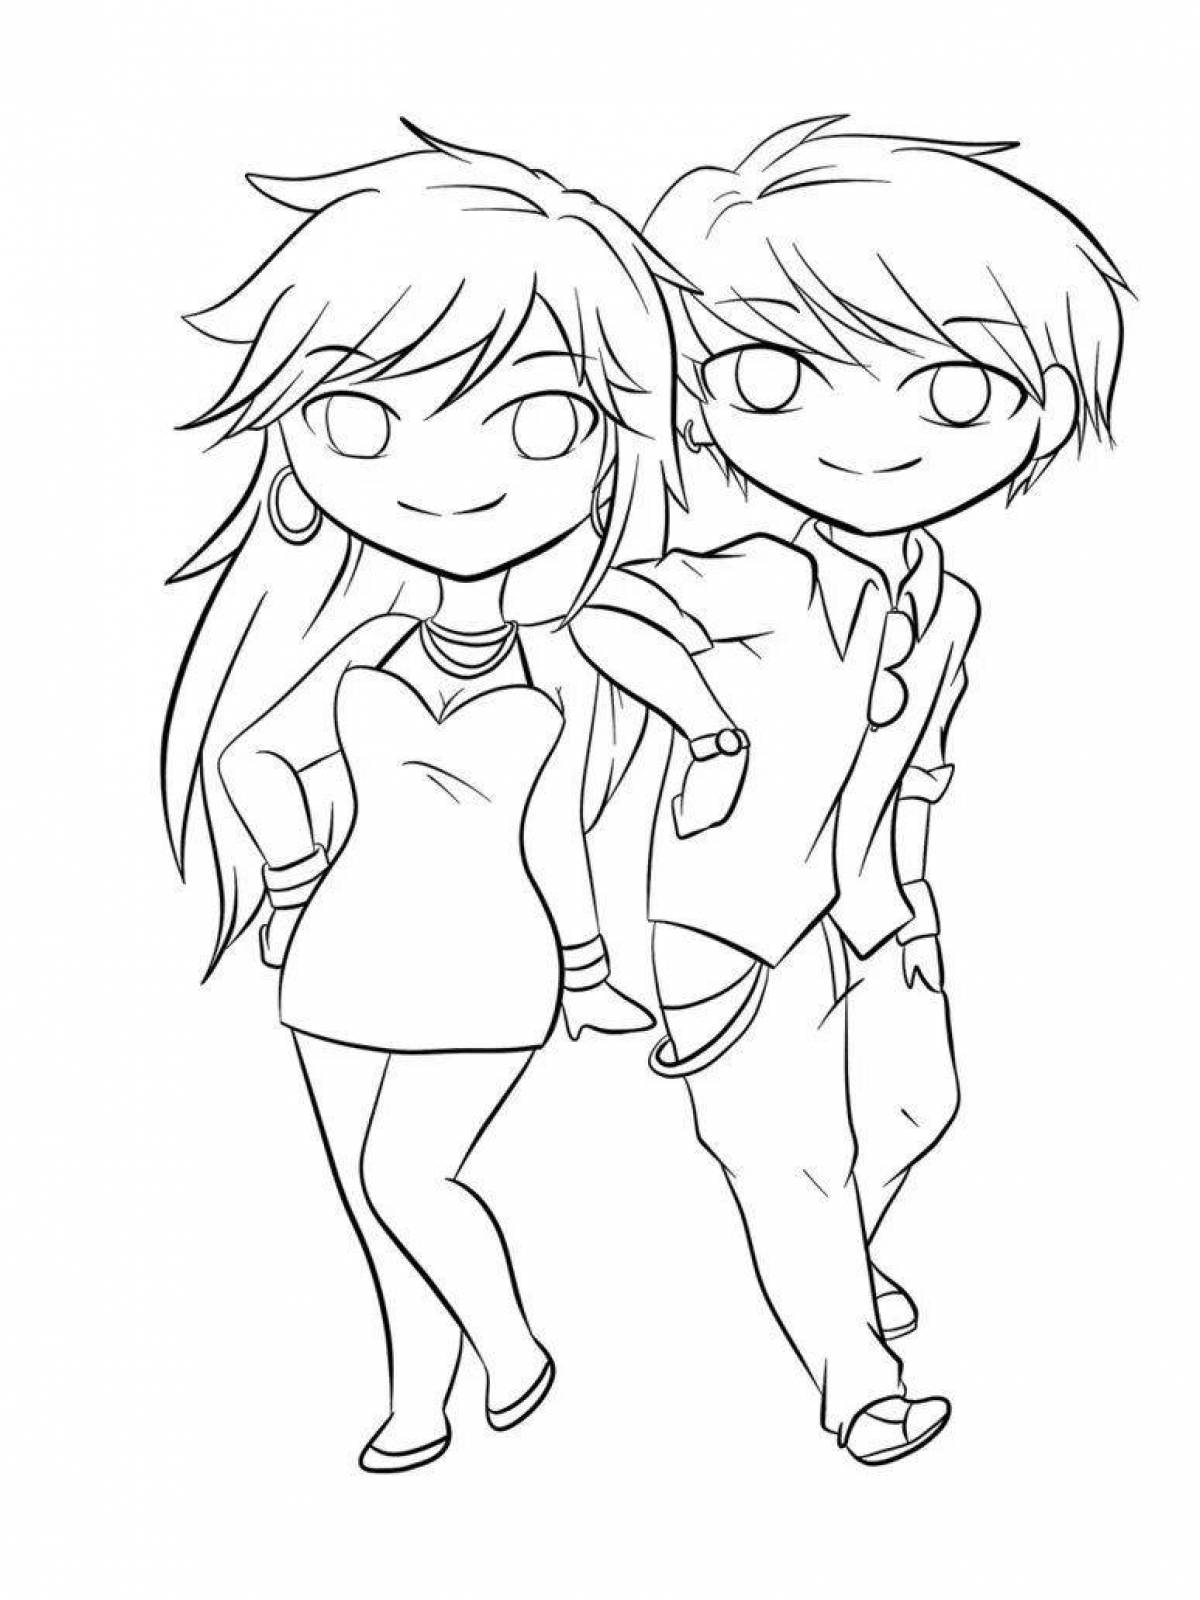 Fancy anime boys and girls coloring pages